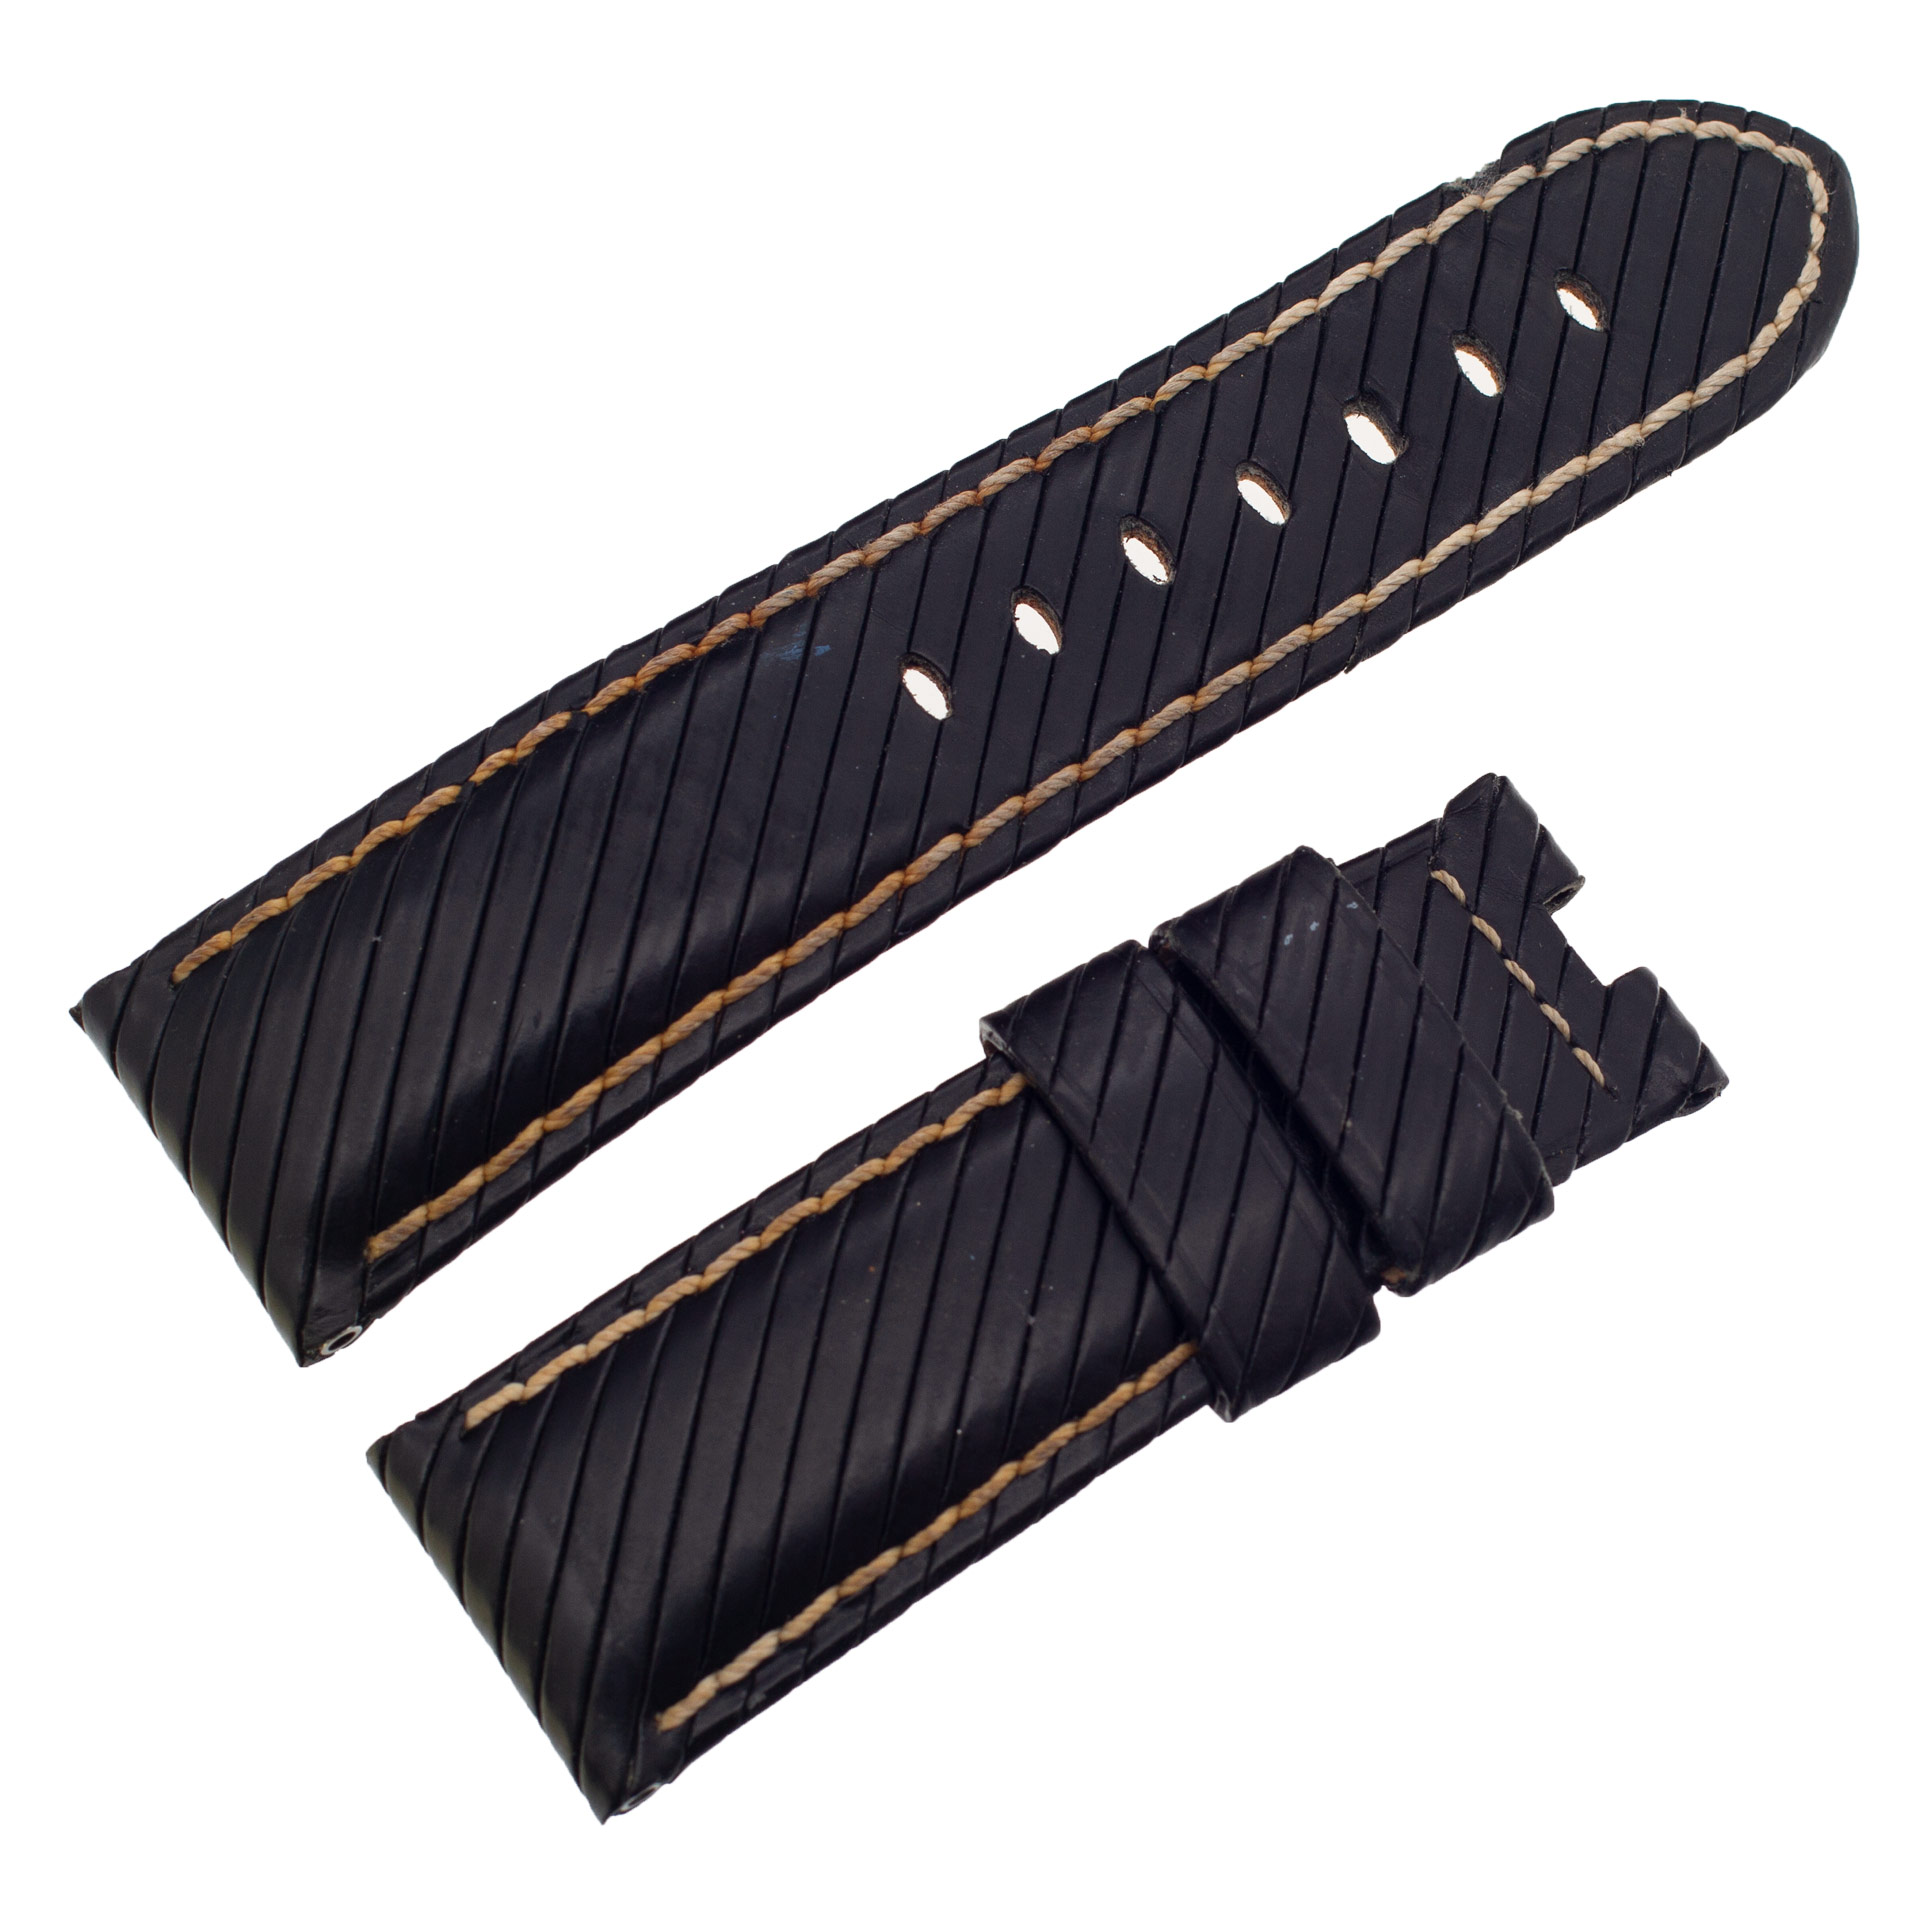 Panerai black leather strap with stitching  24mm x 21mm